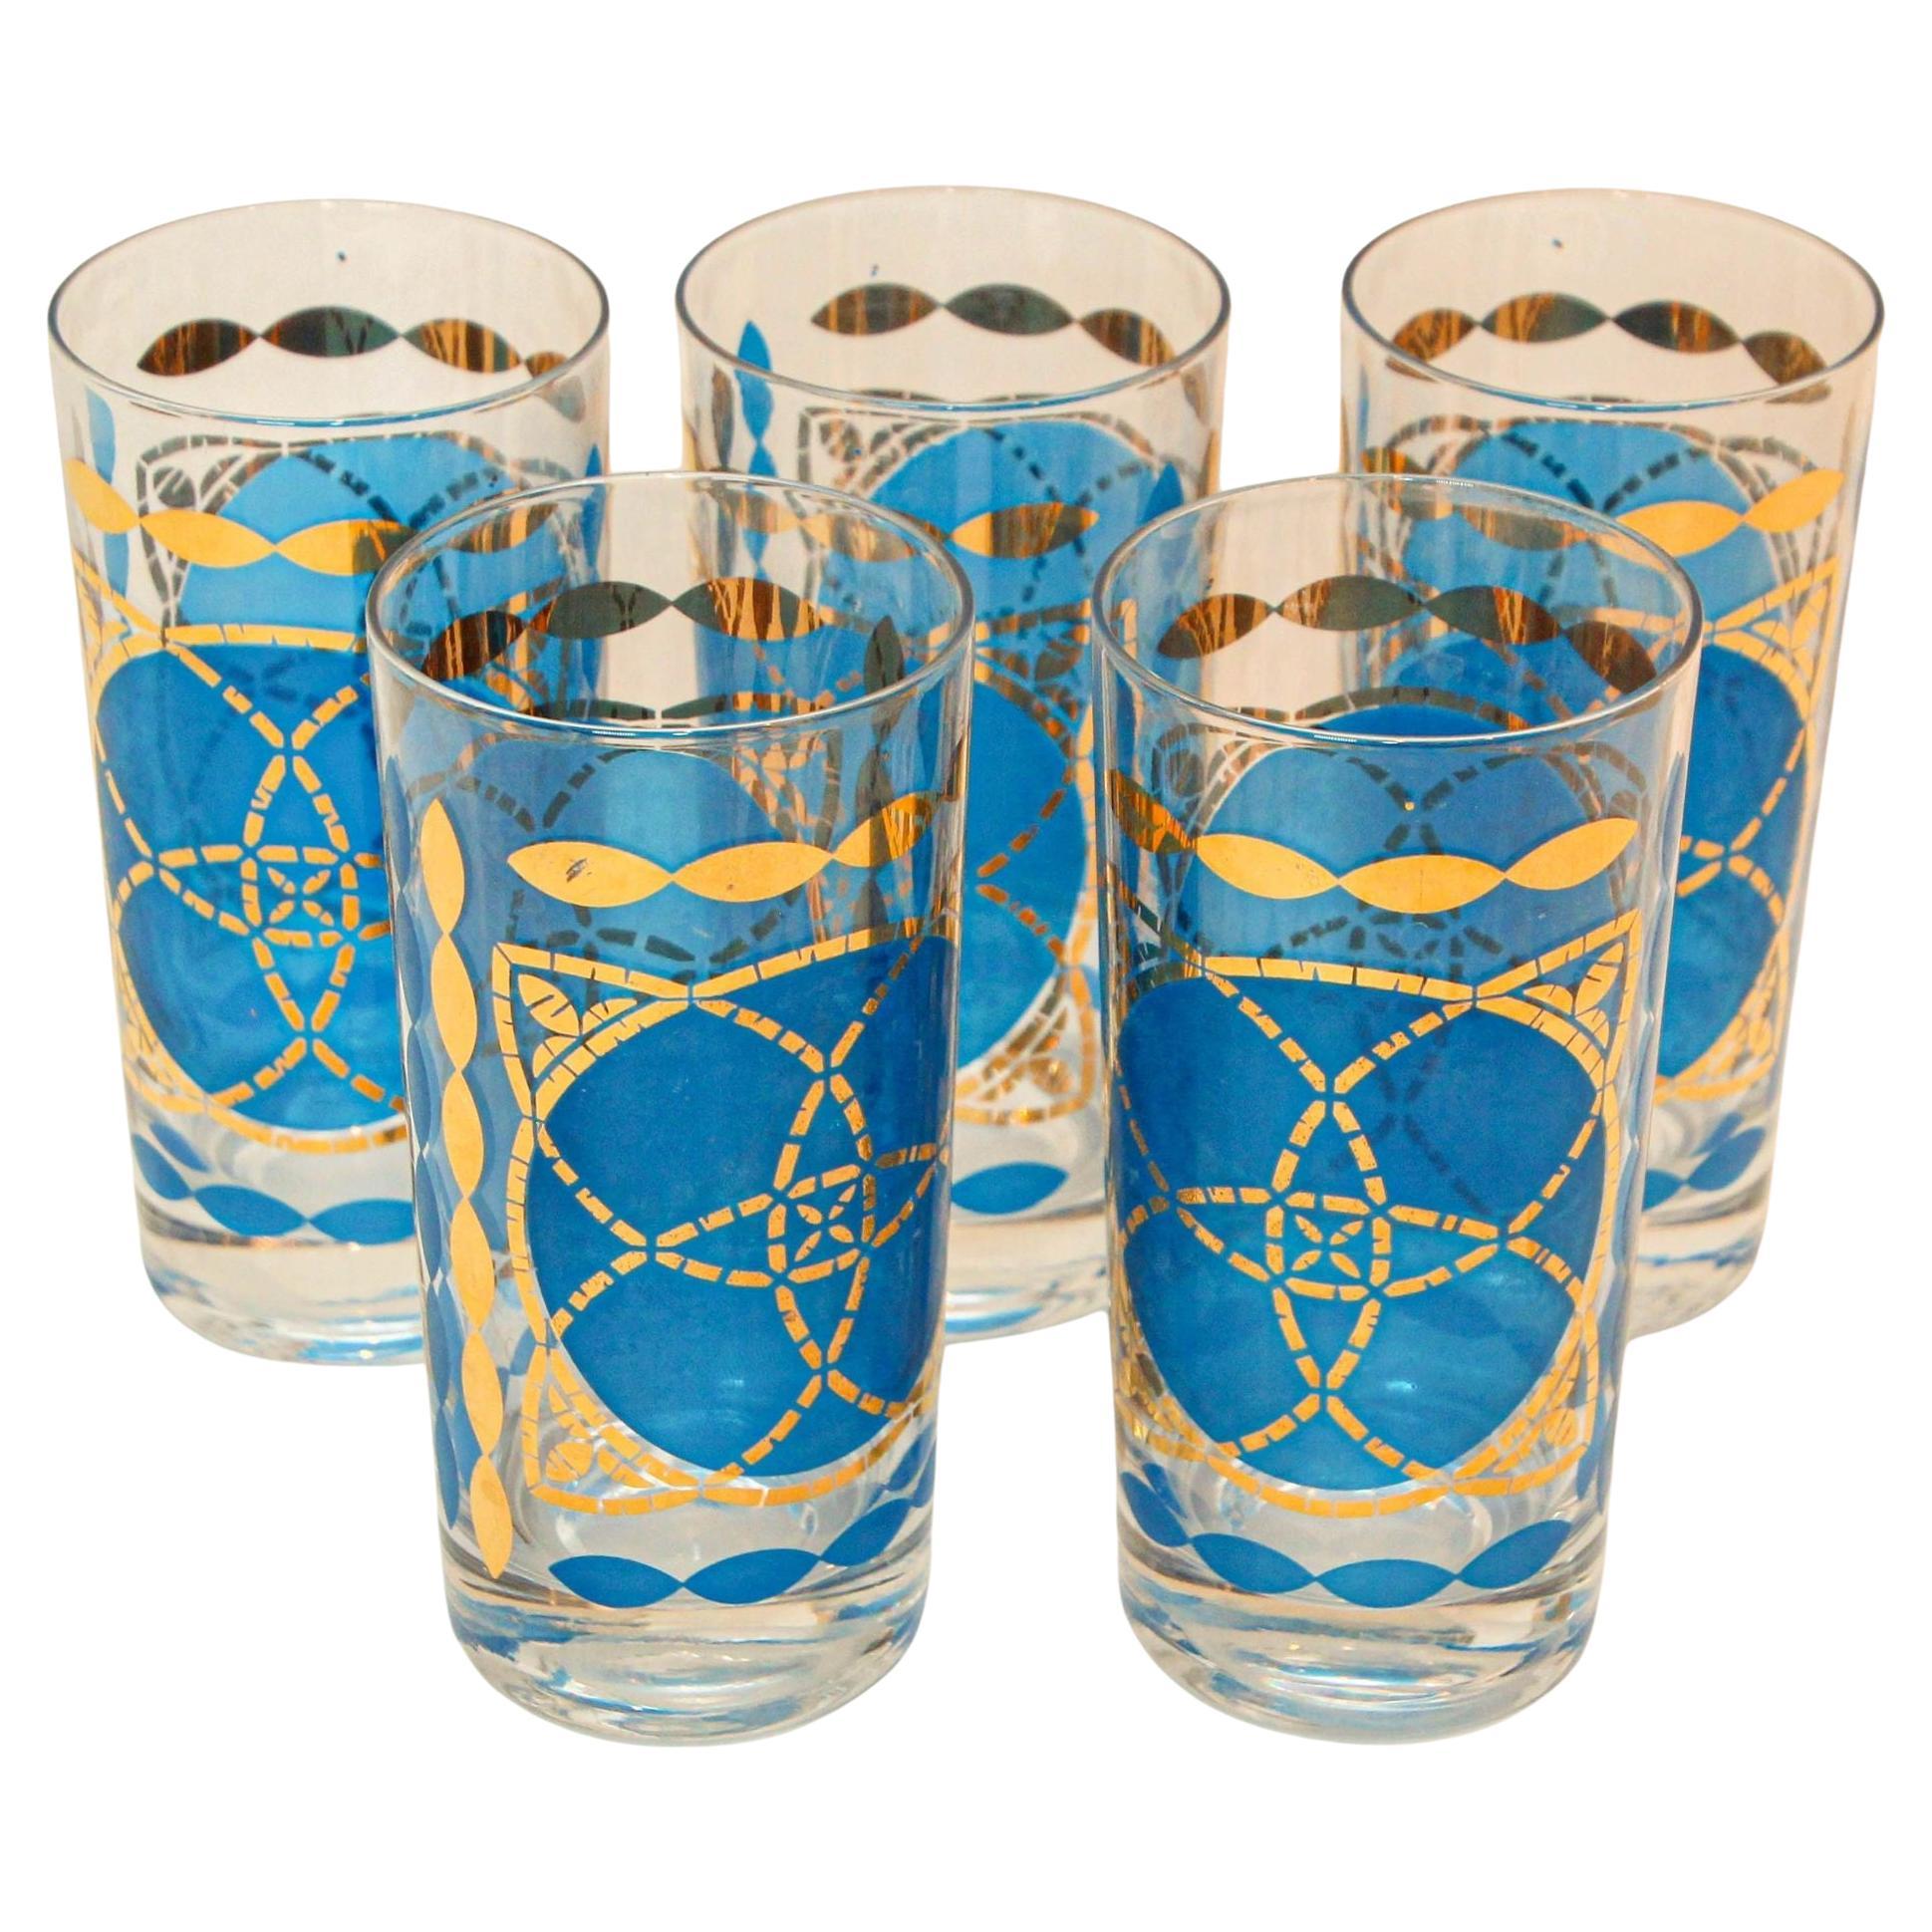 1960s Georges Briard Highball Cocktail Glasses Blue and Gold Design Set of 5